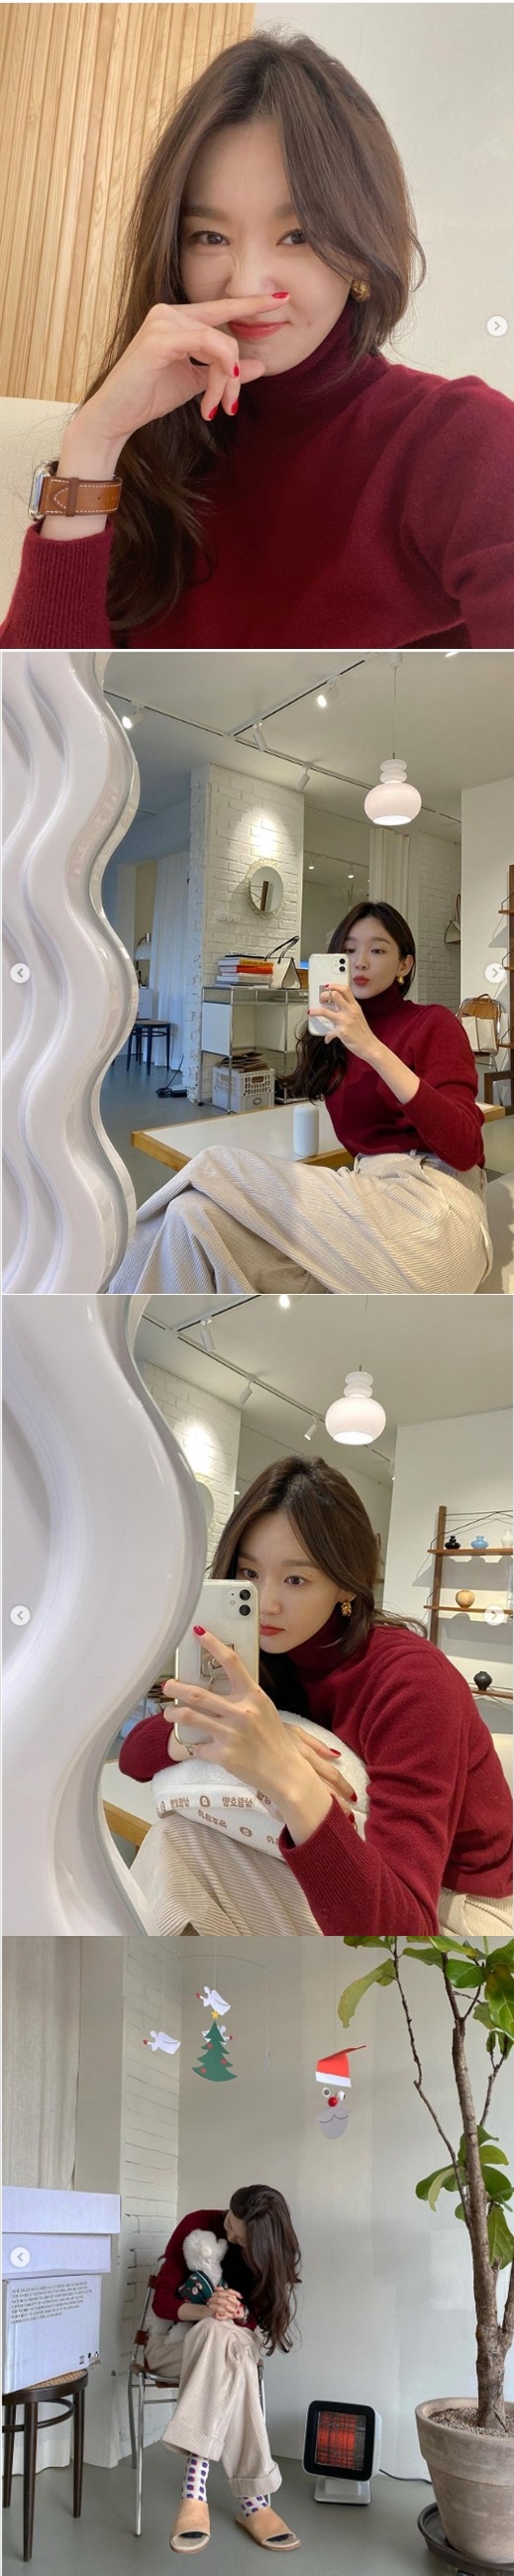 Self-Cargeen Kang Min-kyung, Pet and Lovely Two Shots...Beautiful Lookes to Blow José Coronado.Group Davisi member Kang Min-kyung has revealed the current situation.On the 21st, Kang Min-kyung posted several photos on his Instagram with an article entitled Samsildu Mobiloo Feeling.Kang Min-kyung in the photo is taking a selfie wearing a Christmas-like red neck polar sweater and beige pants.Kang Min-kyungs Pet tissue also made the laughs of the netizens in the Christmas costume like a crack.The netizens who watched the photo responded that the owner resembles a star and José Coronado is the strongest beautiful look to blow.Kang Min-kyung is communicating with fans through his personal channel.Kang Min-kyung Instagram